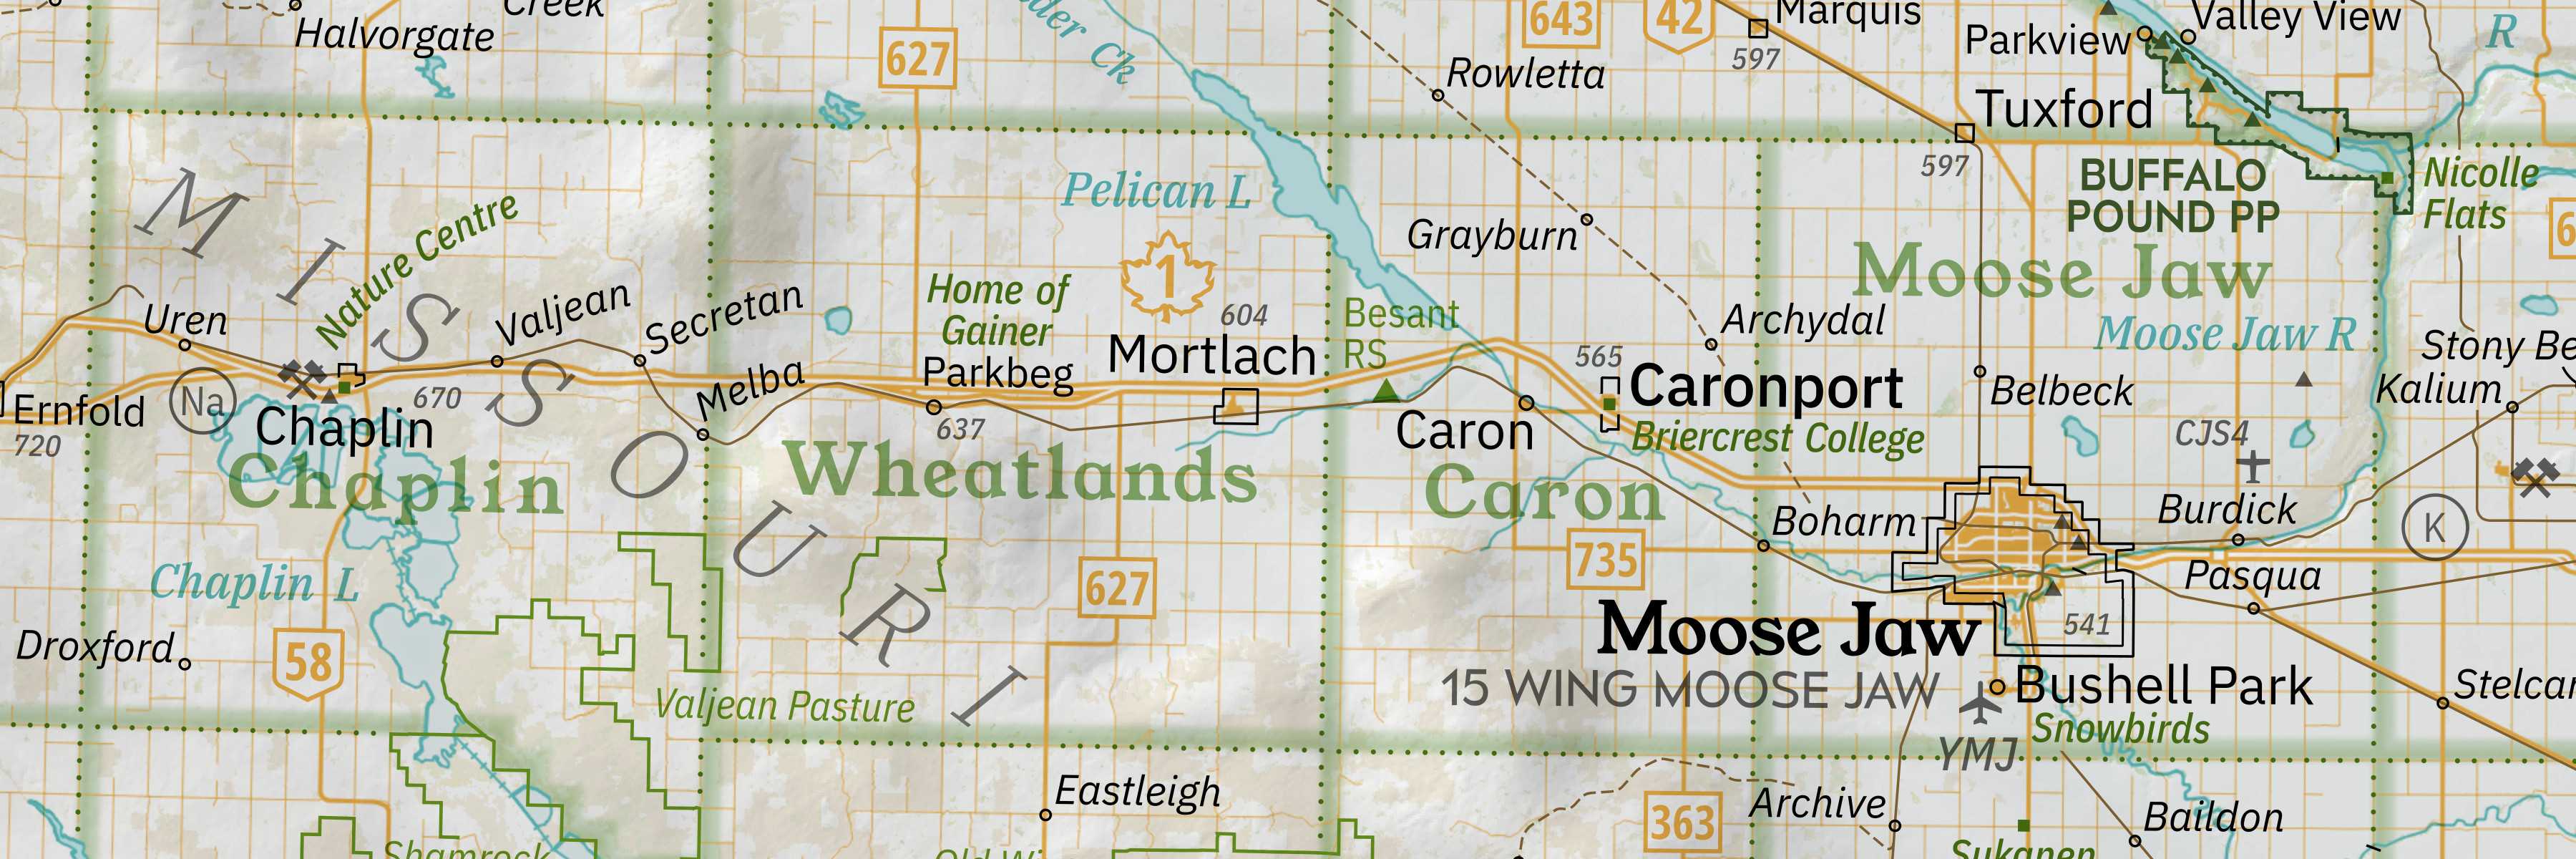 An excerpt of the wall map showing Moose Jaw and the Missouri Coteau.